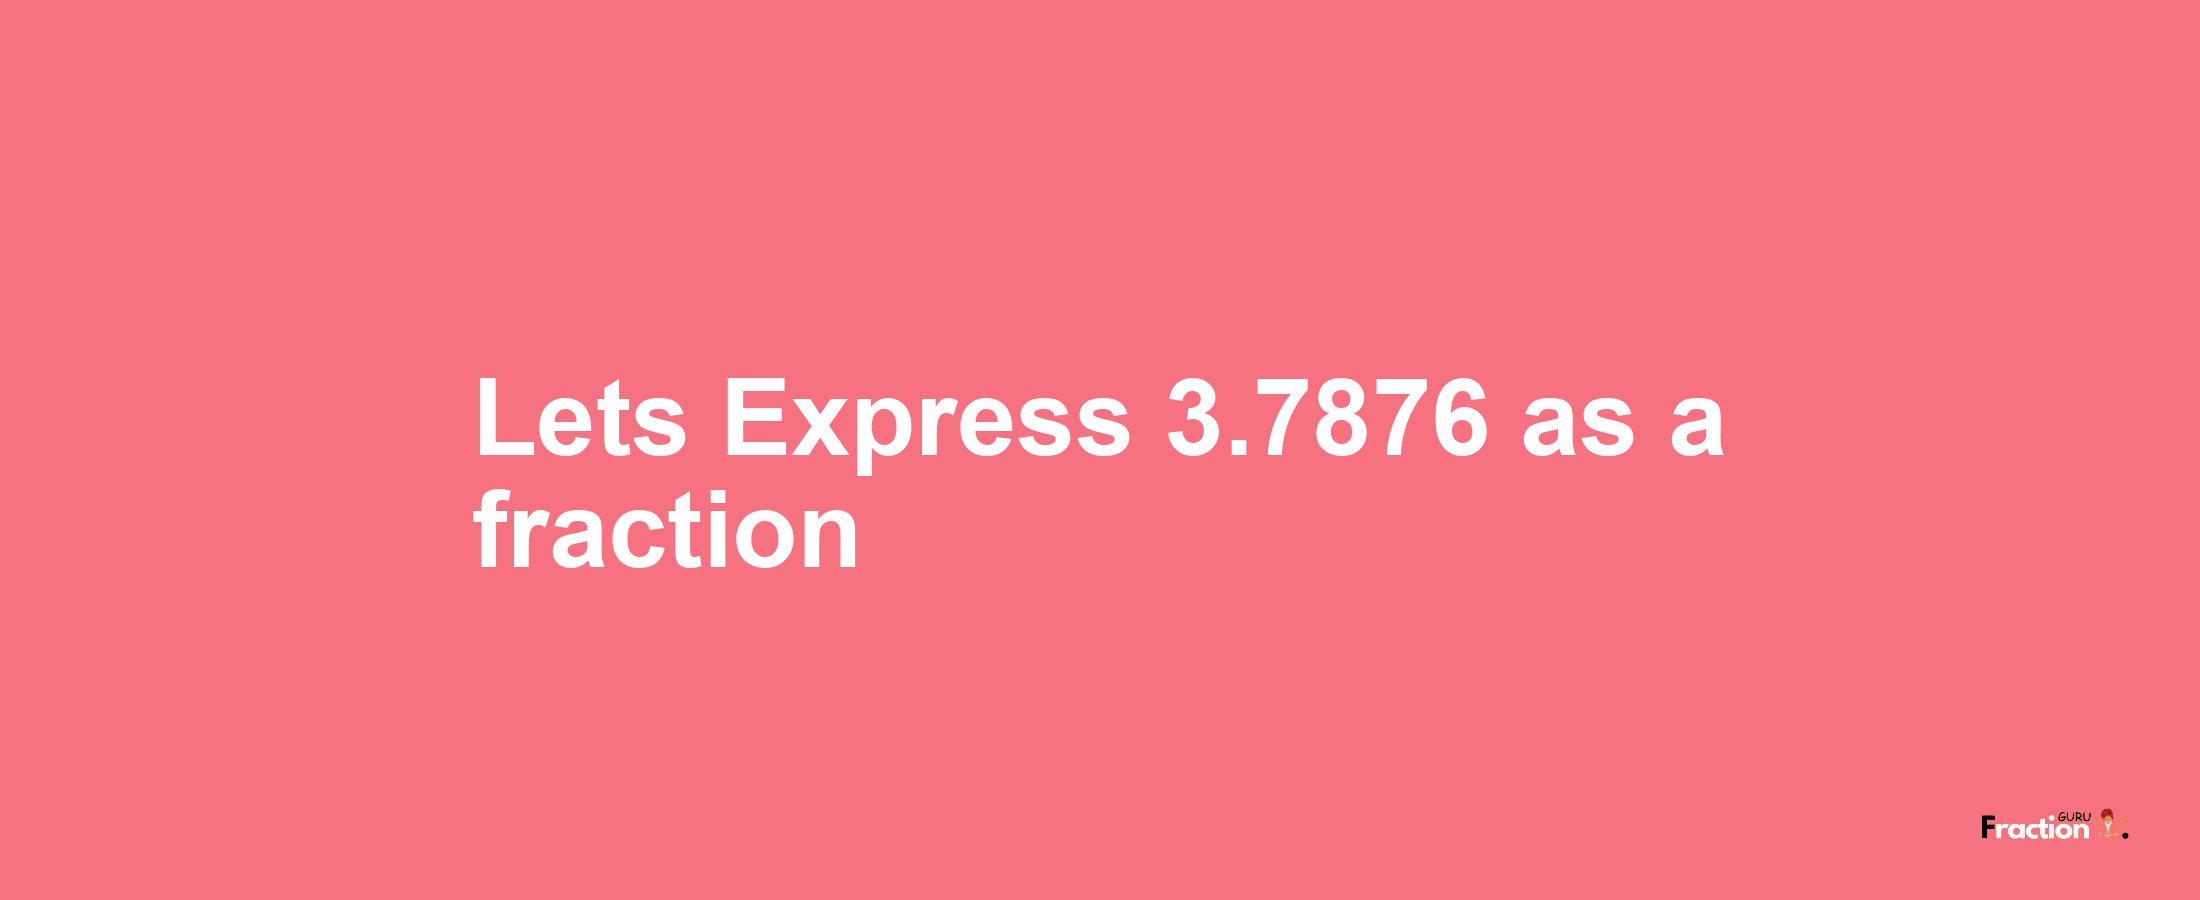 Lets Express 3.7876 as afraction